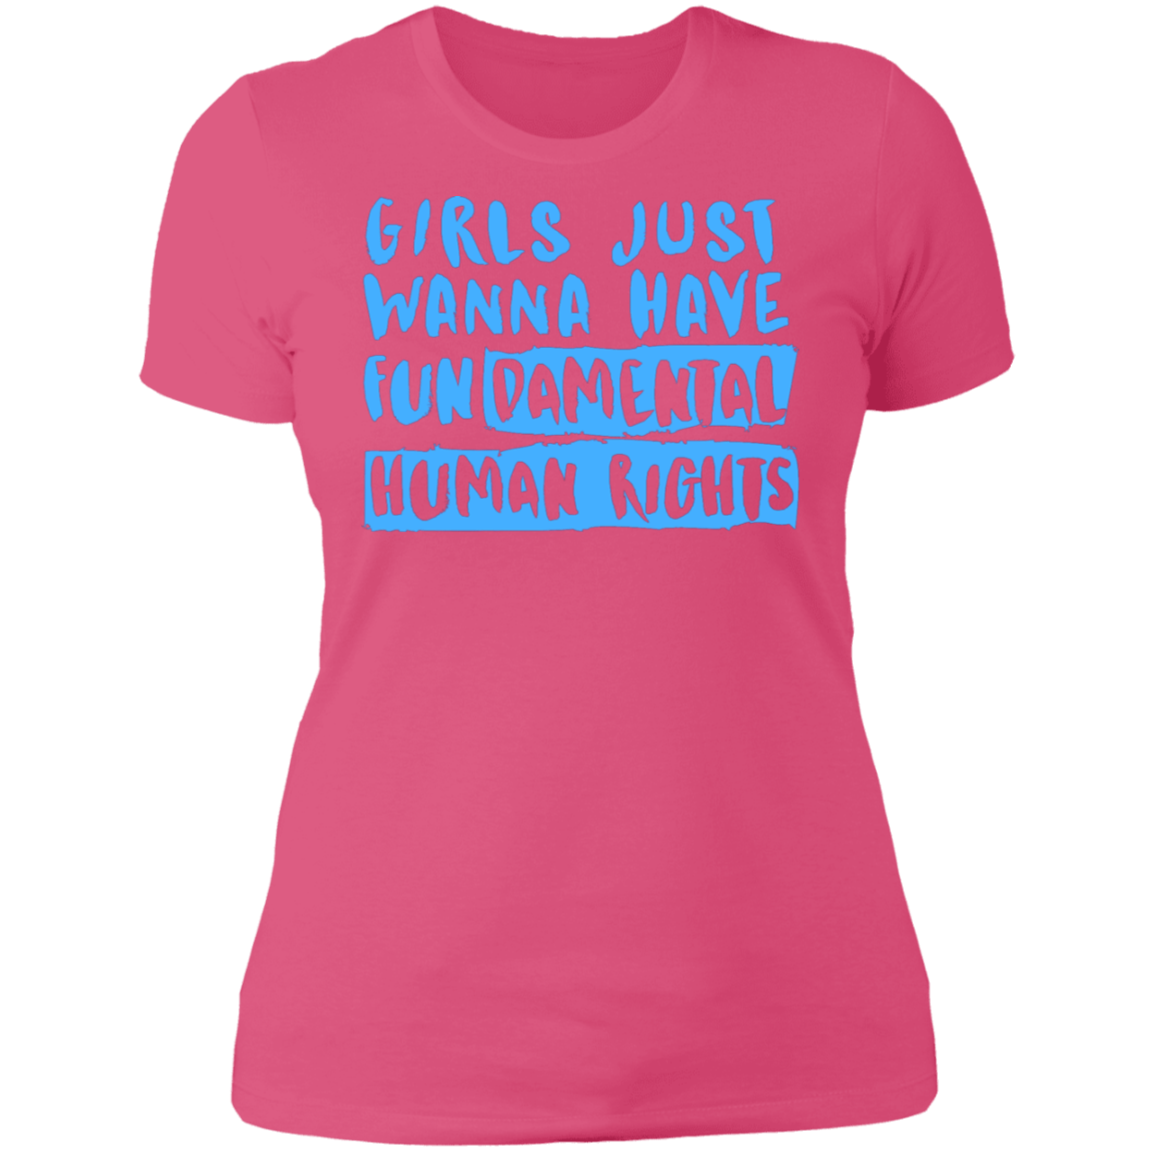 Girls Just Want To Have Fun... Ladies' T-Shirt